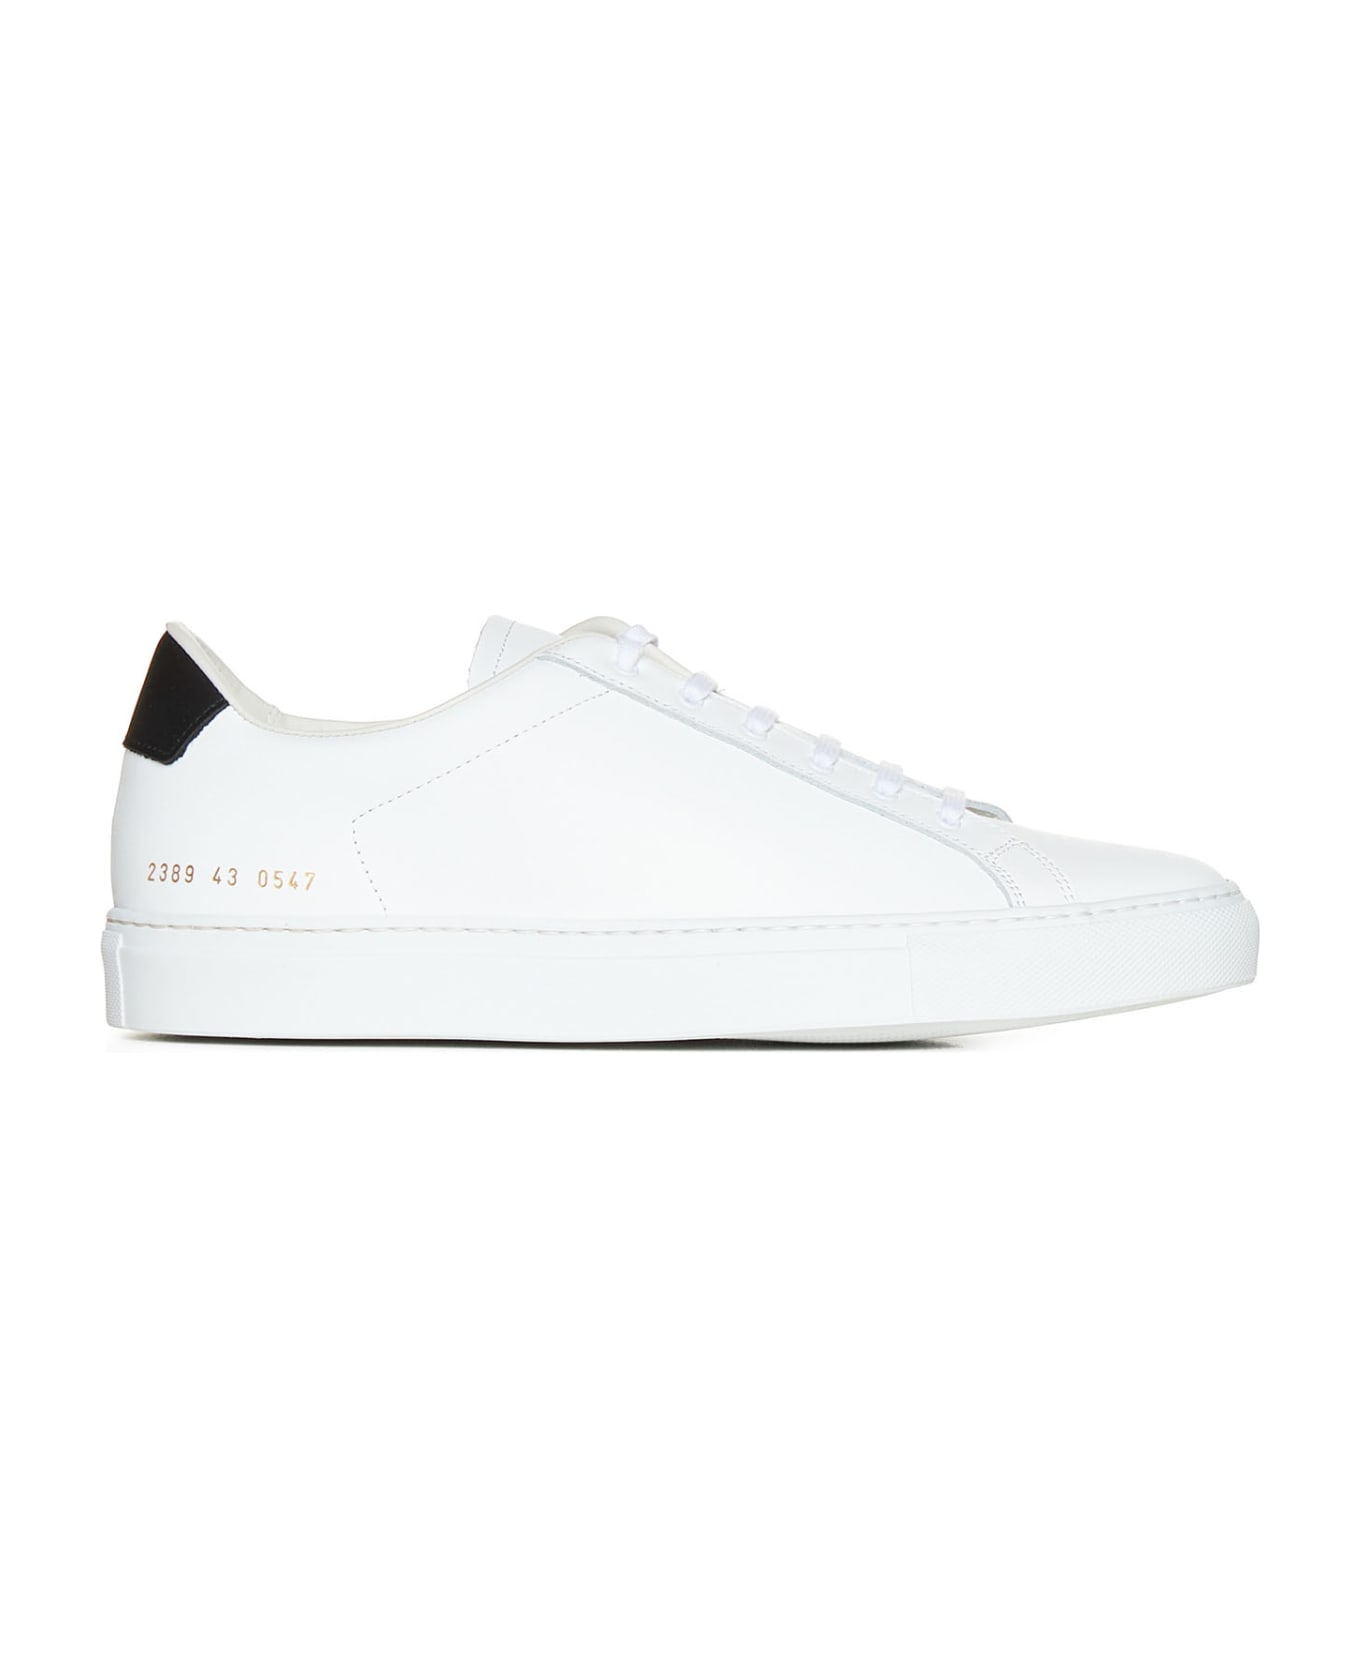 Common Projects White Leather Sneakers - White